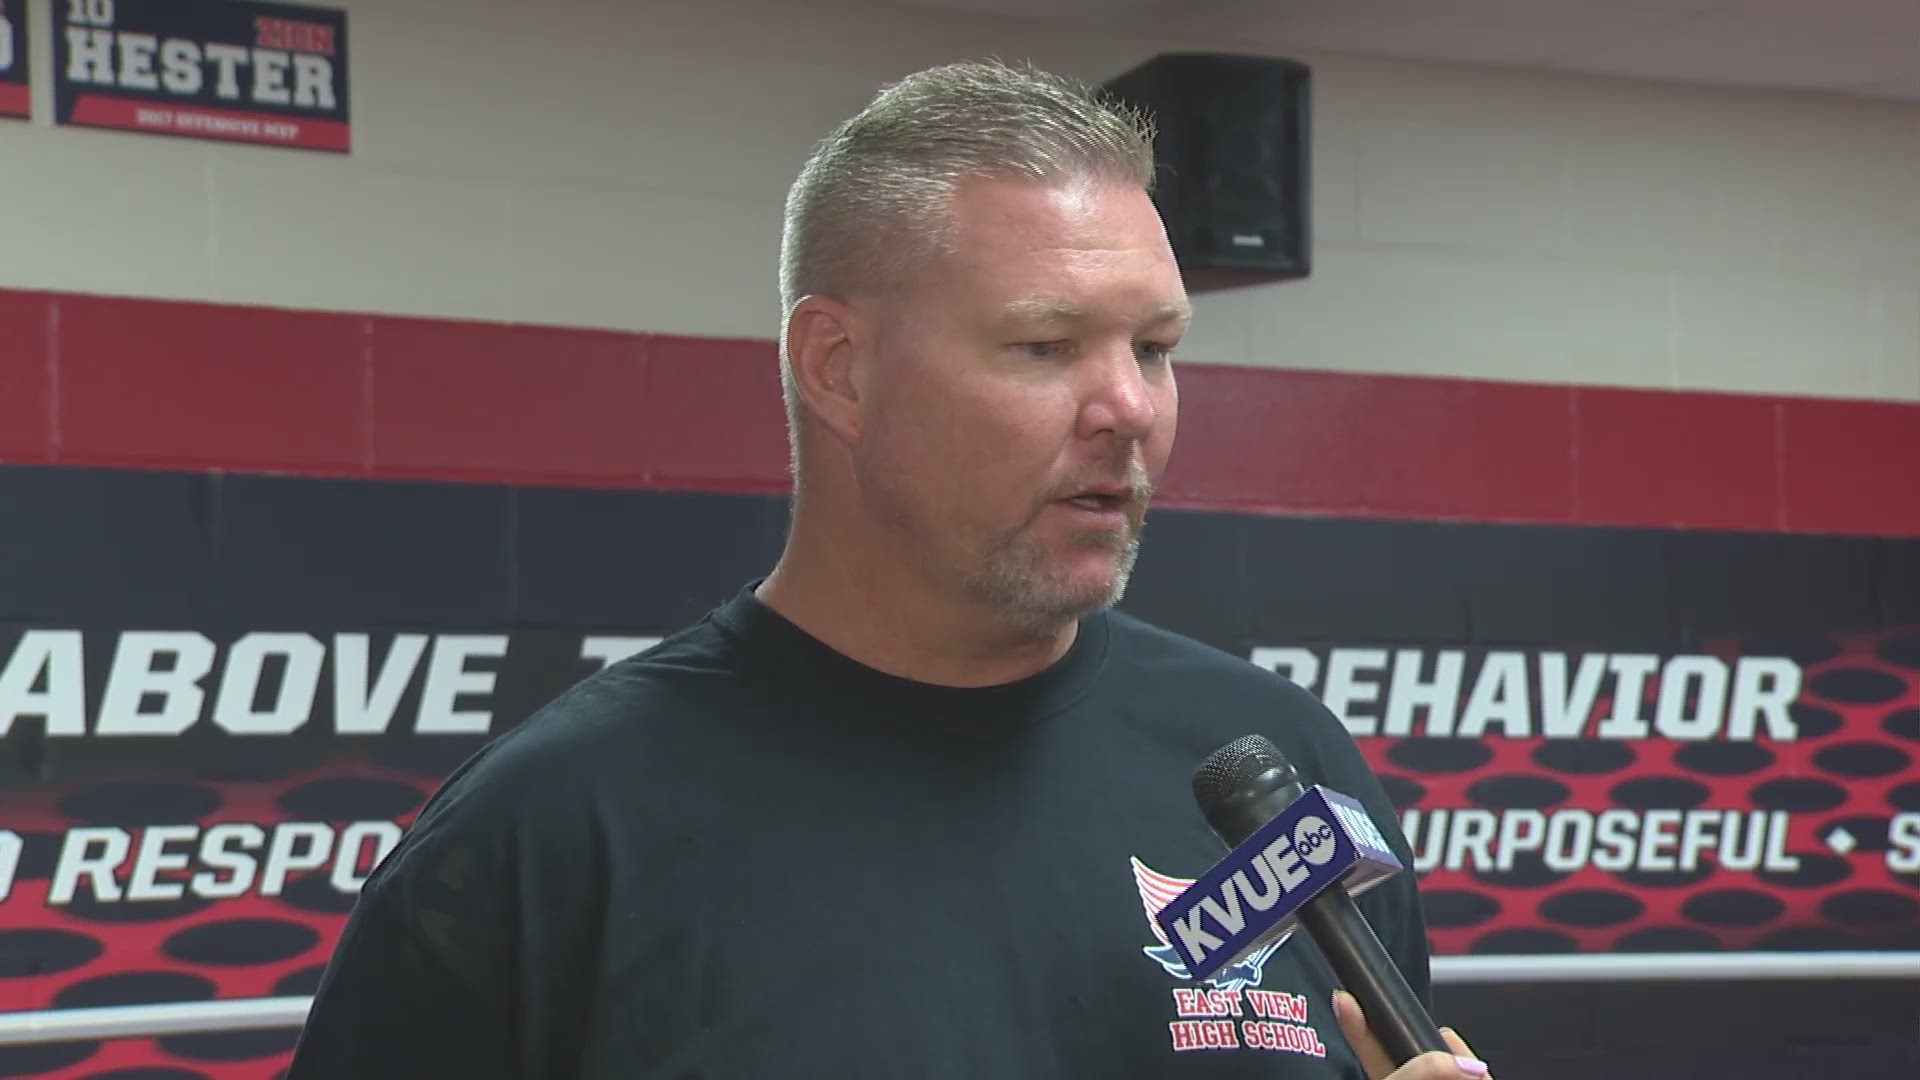 KVUE's Stacy Slayden talks with East View coach Rob Davies about the upcoming season